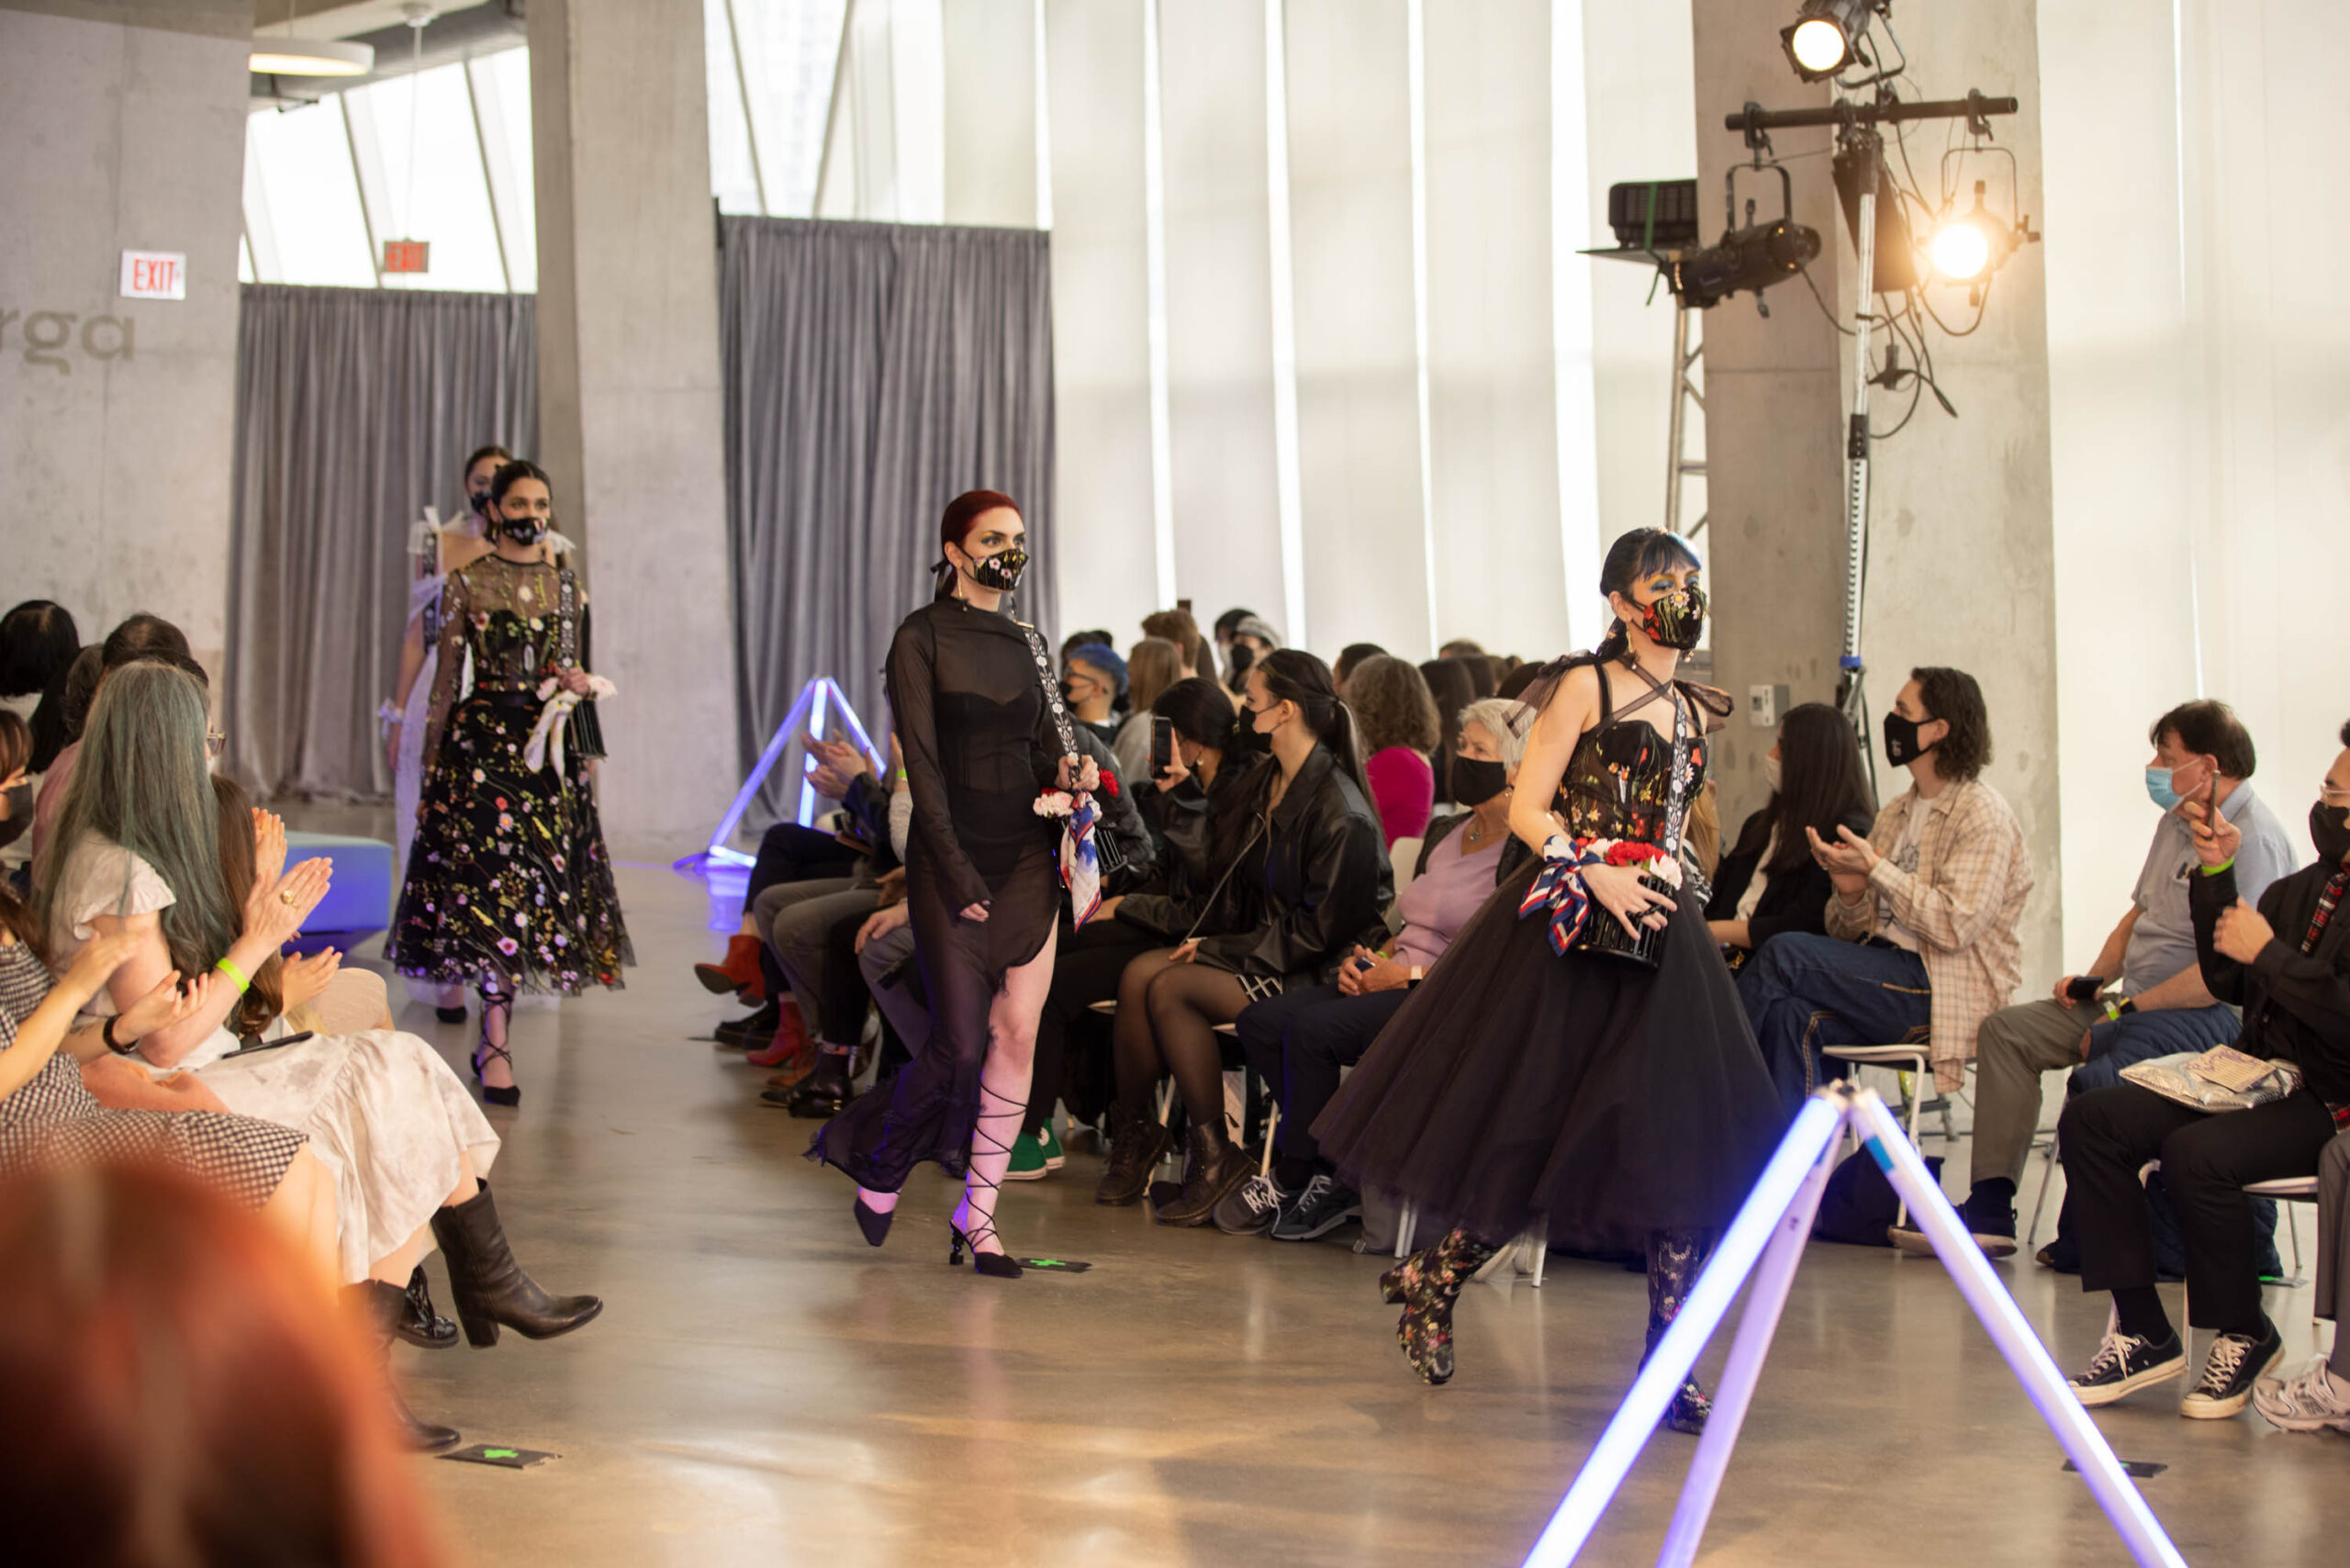 Another snapshot of the Mass Exodus 2022 Ryerson Fashion Show.